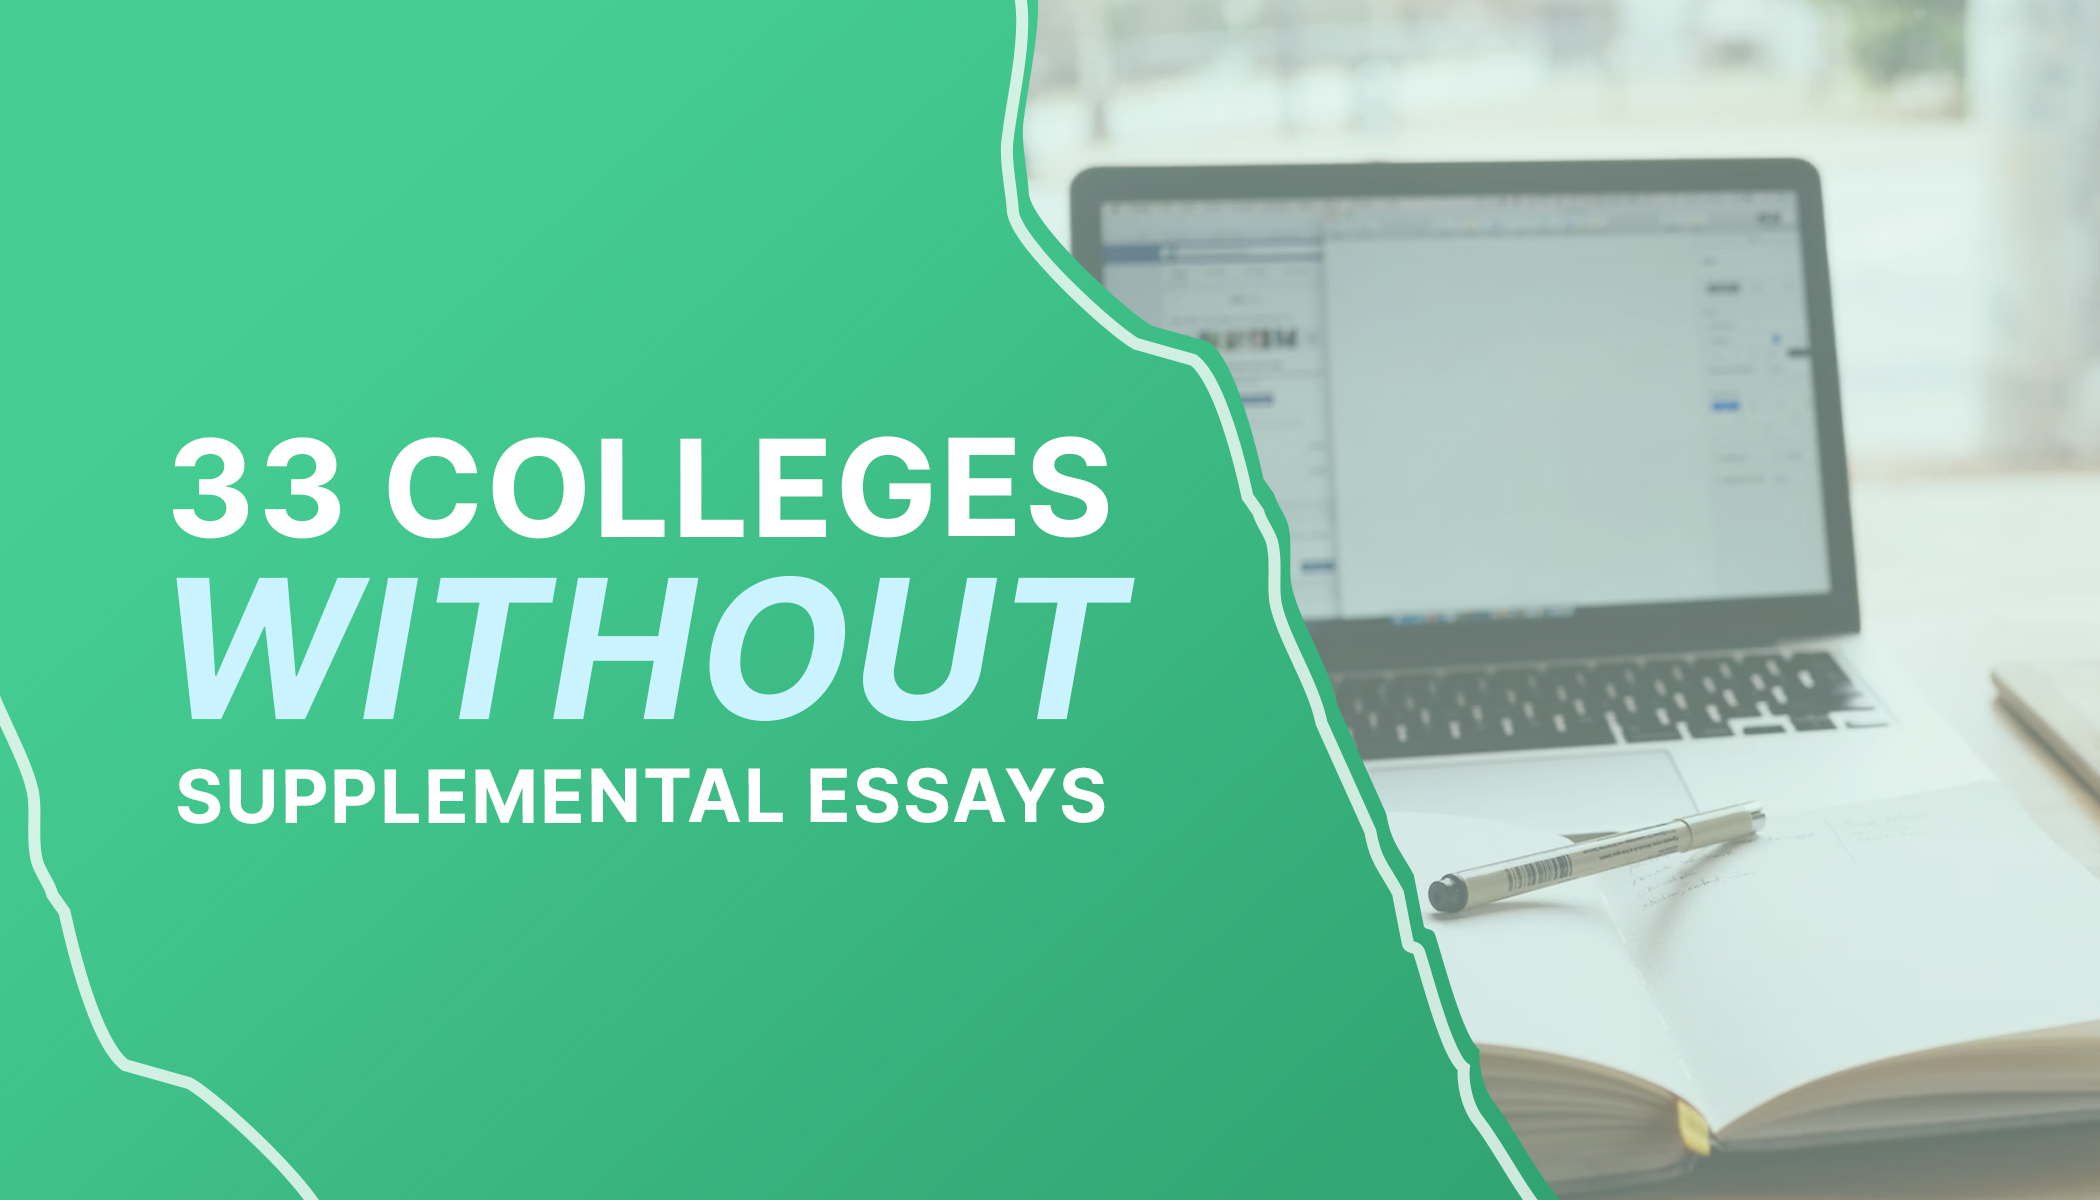 33 Colleges Without Supplemental Essays!